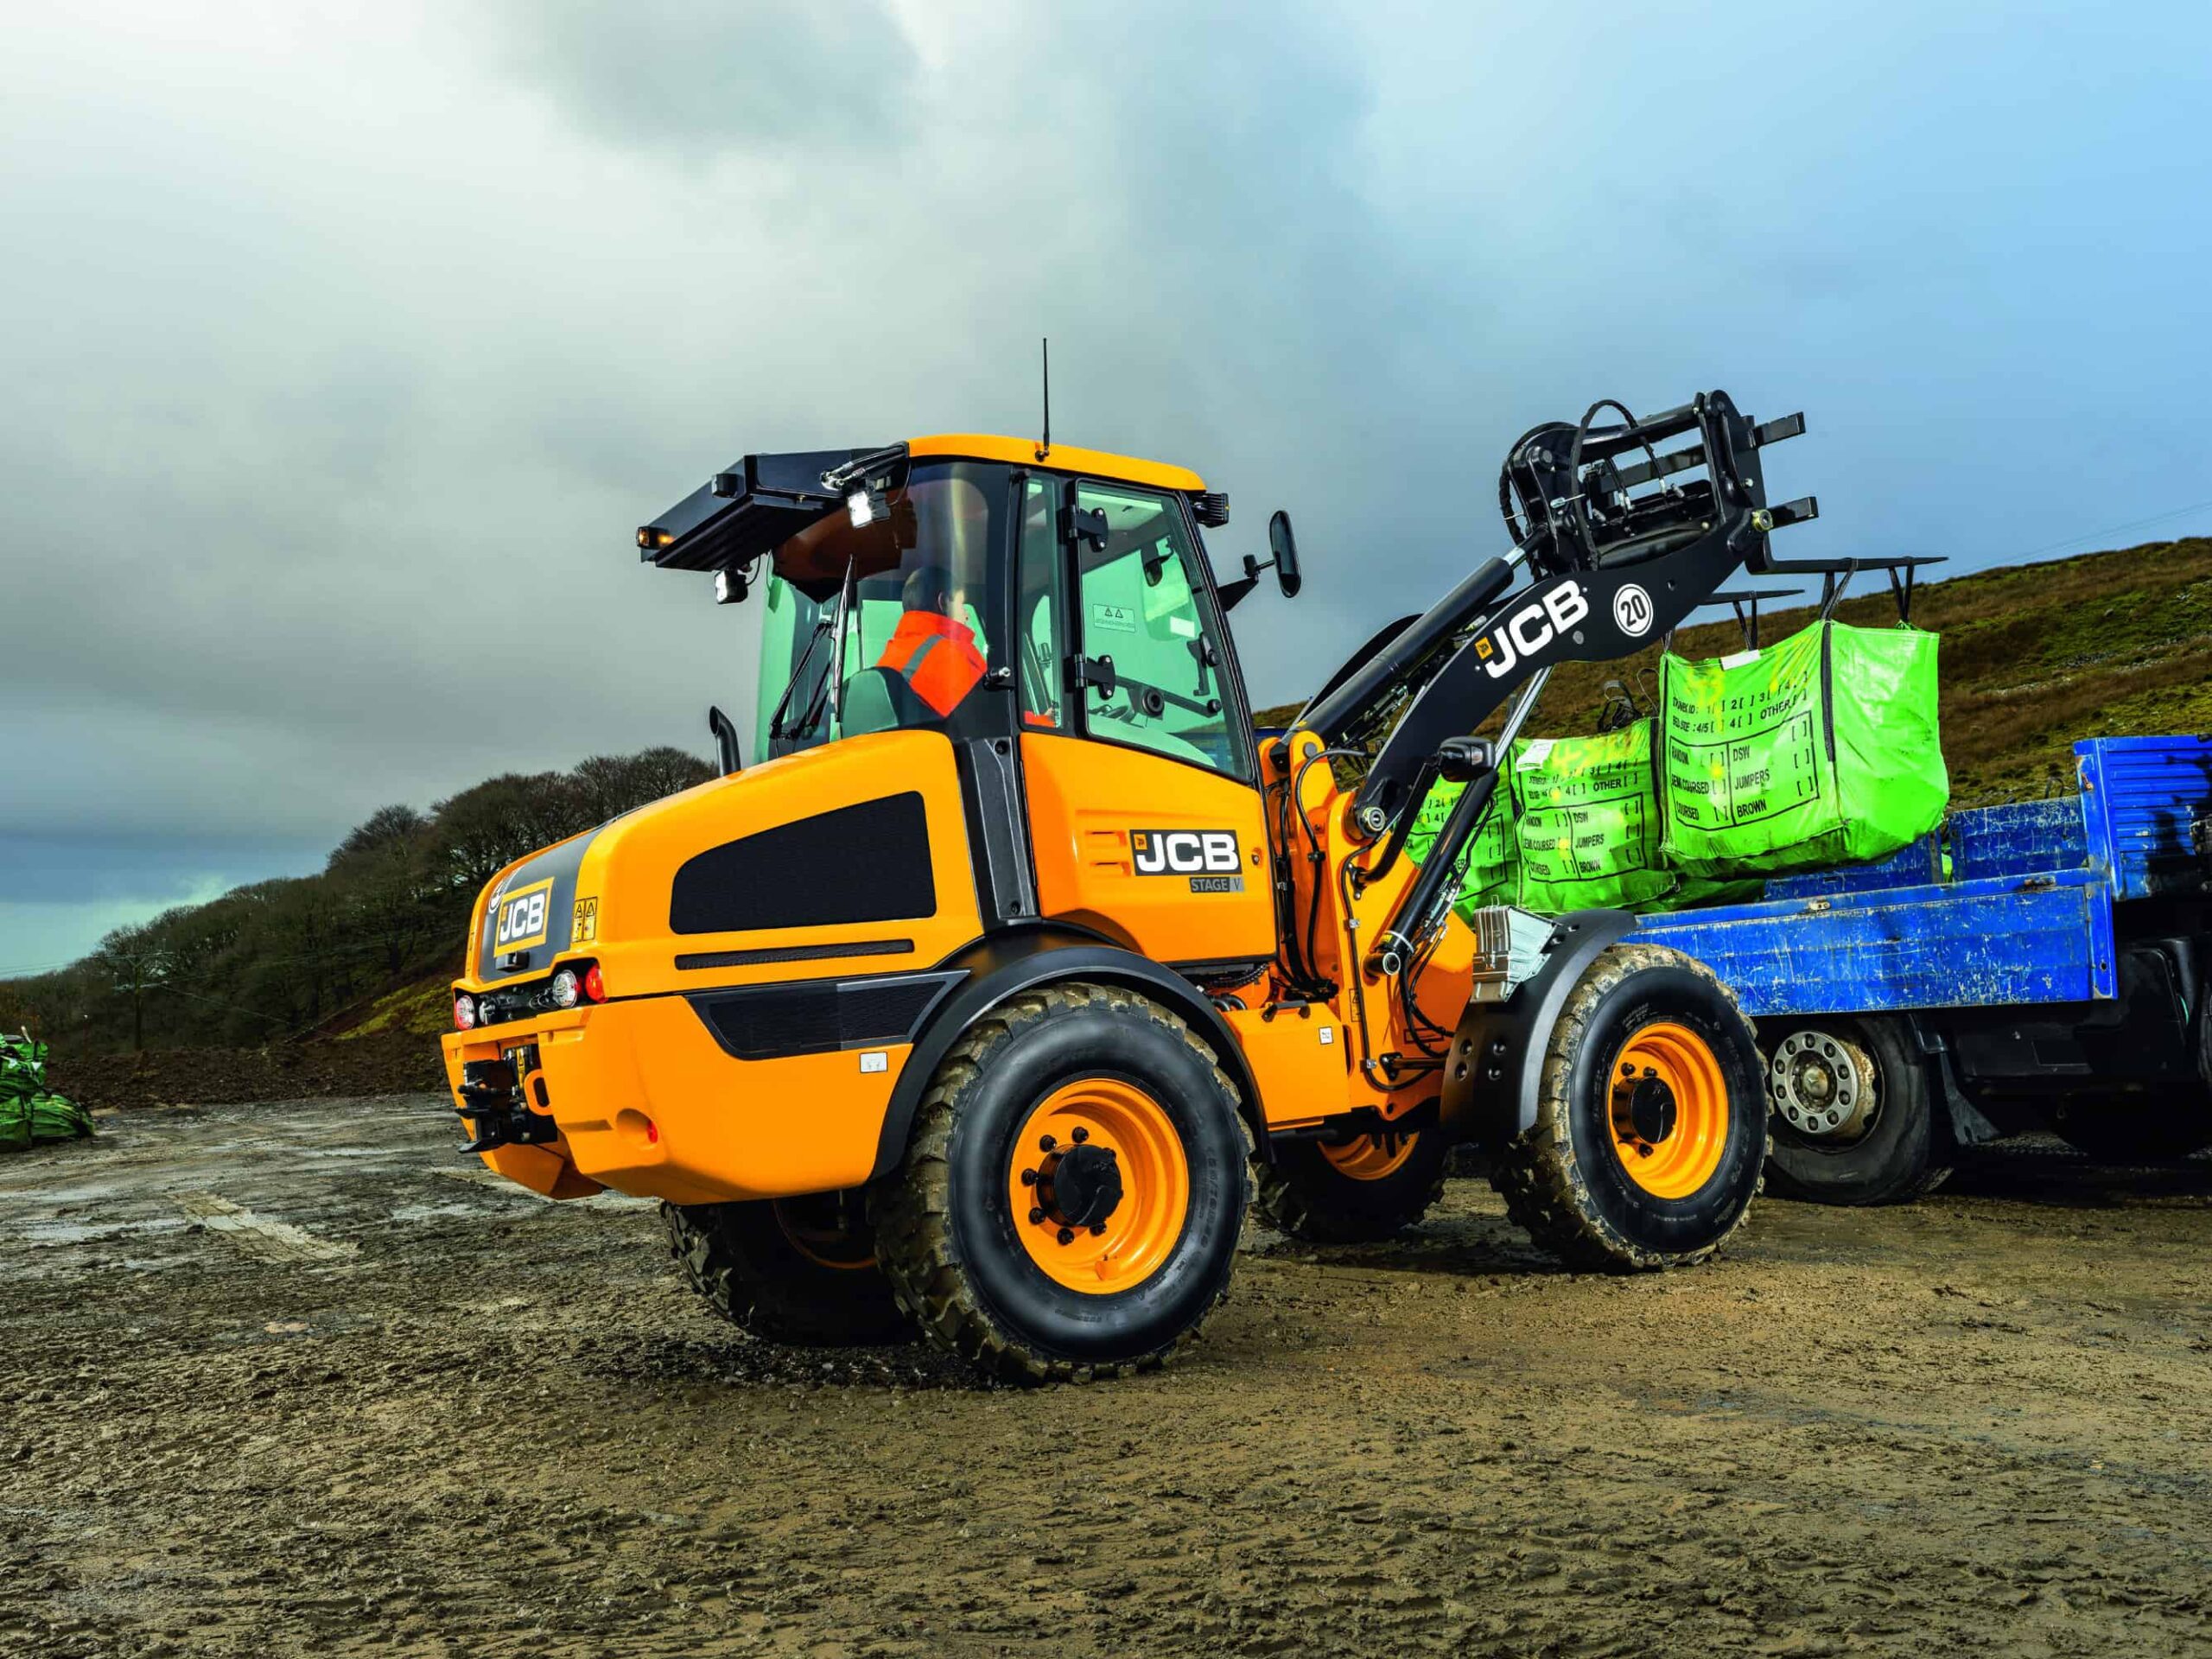 Latest JCB compact wheel loaders are more fuel efficient